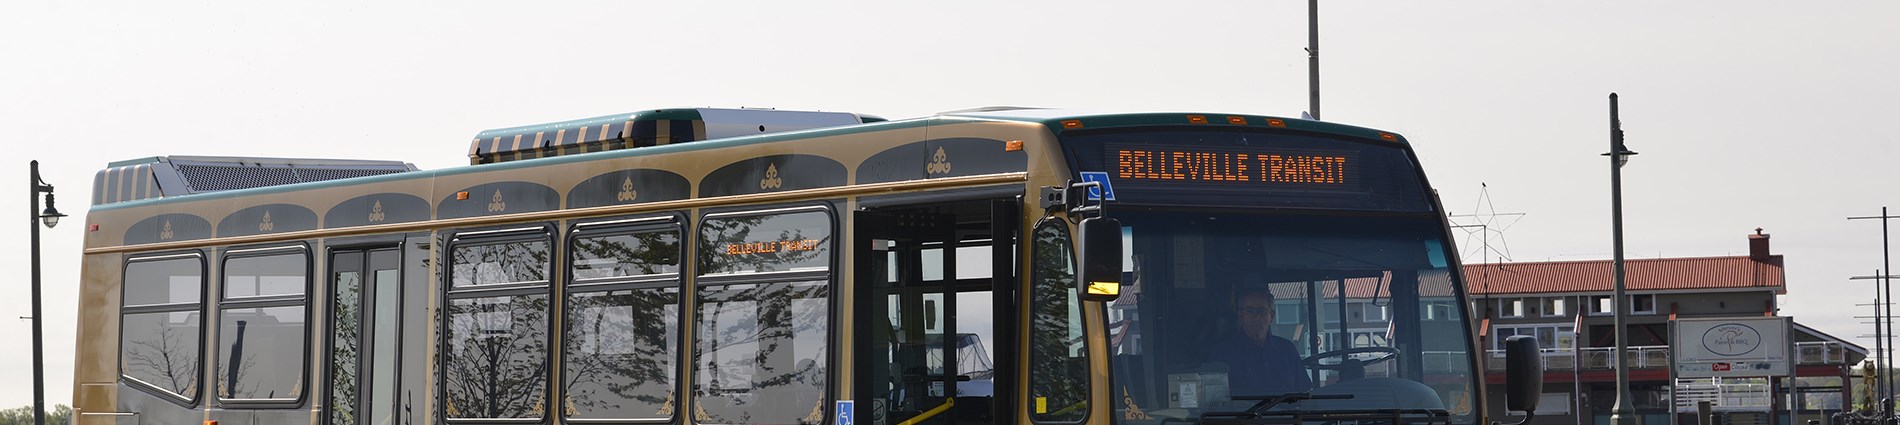 Image of the top of the Belleville Transit trolley bus